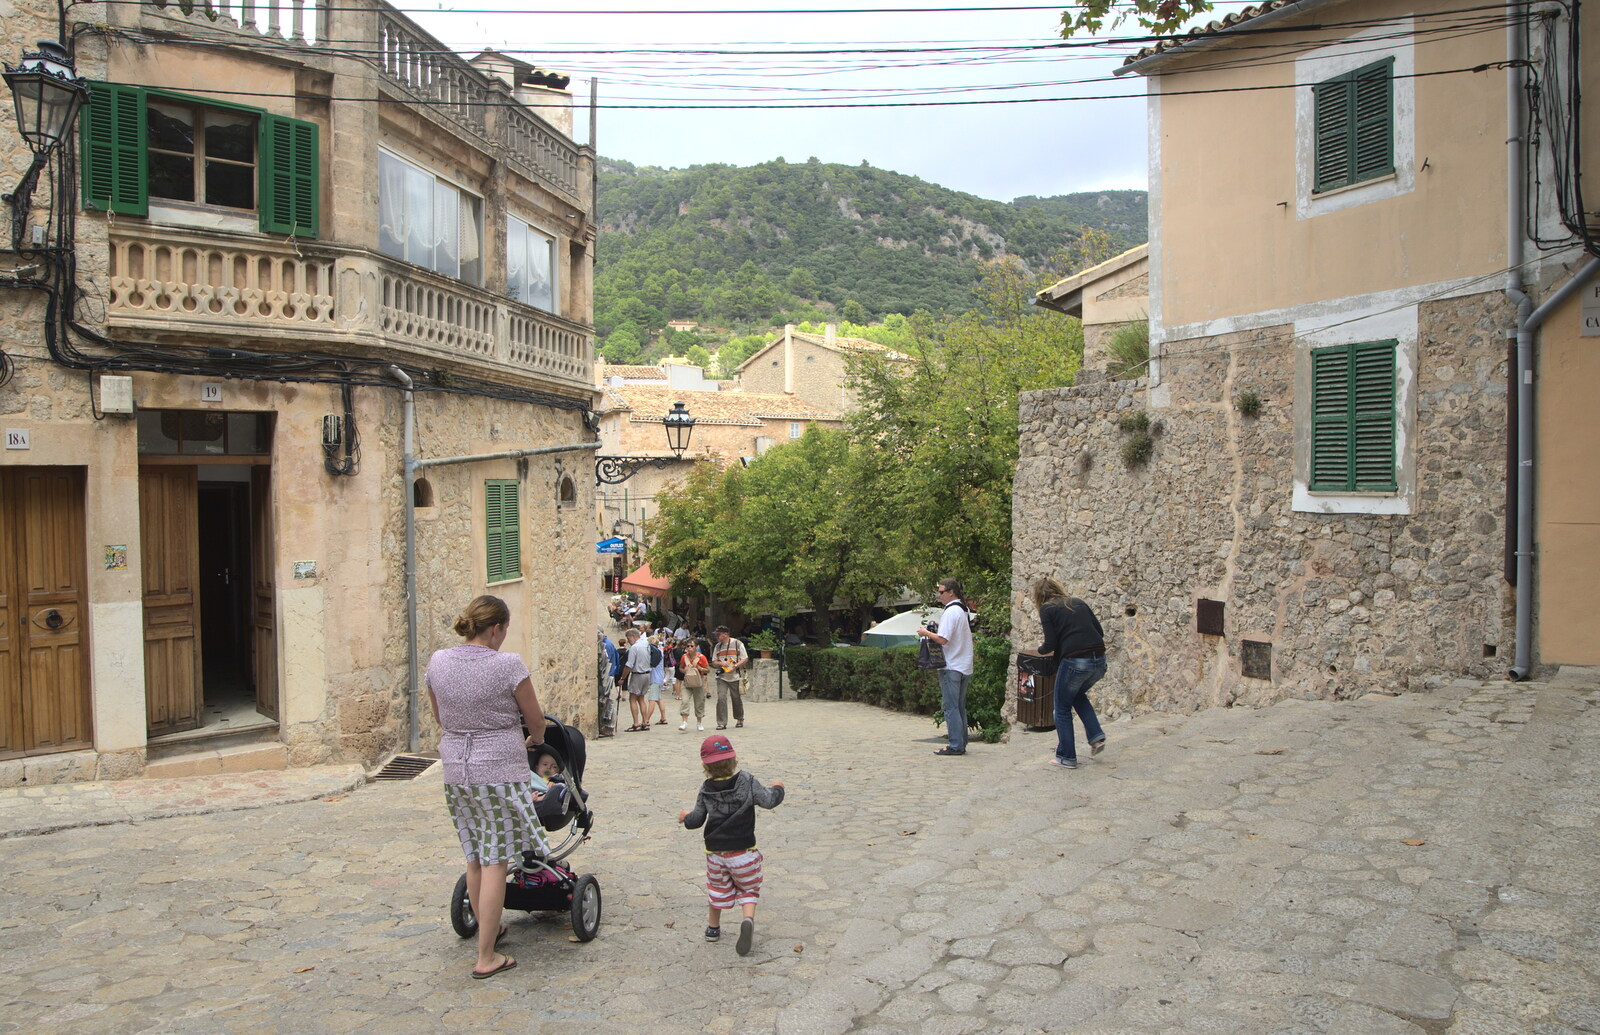 Walking down a cobbled hill from A Few Hours in Valdemossa, Mallorca, Spain - 13th September 2012